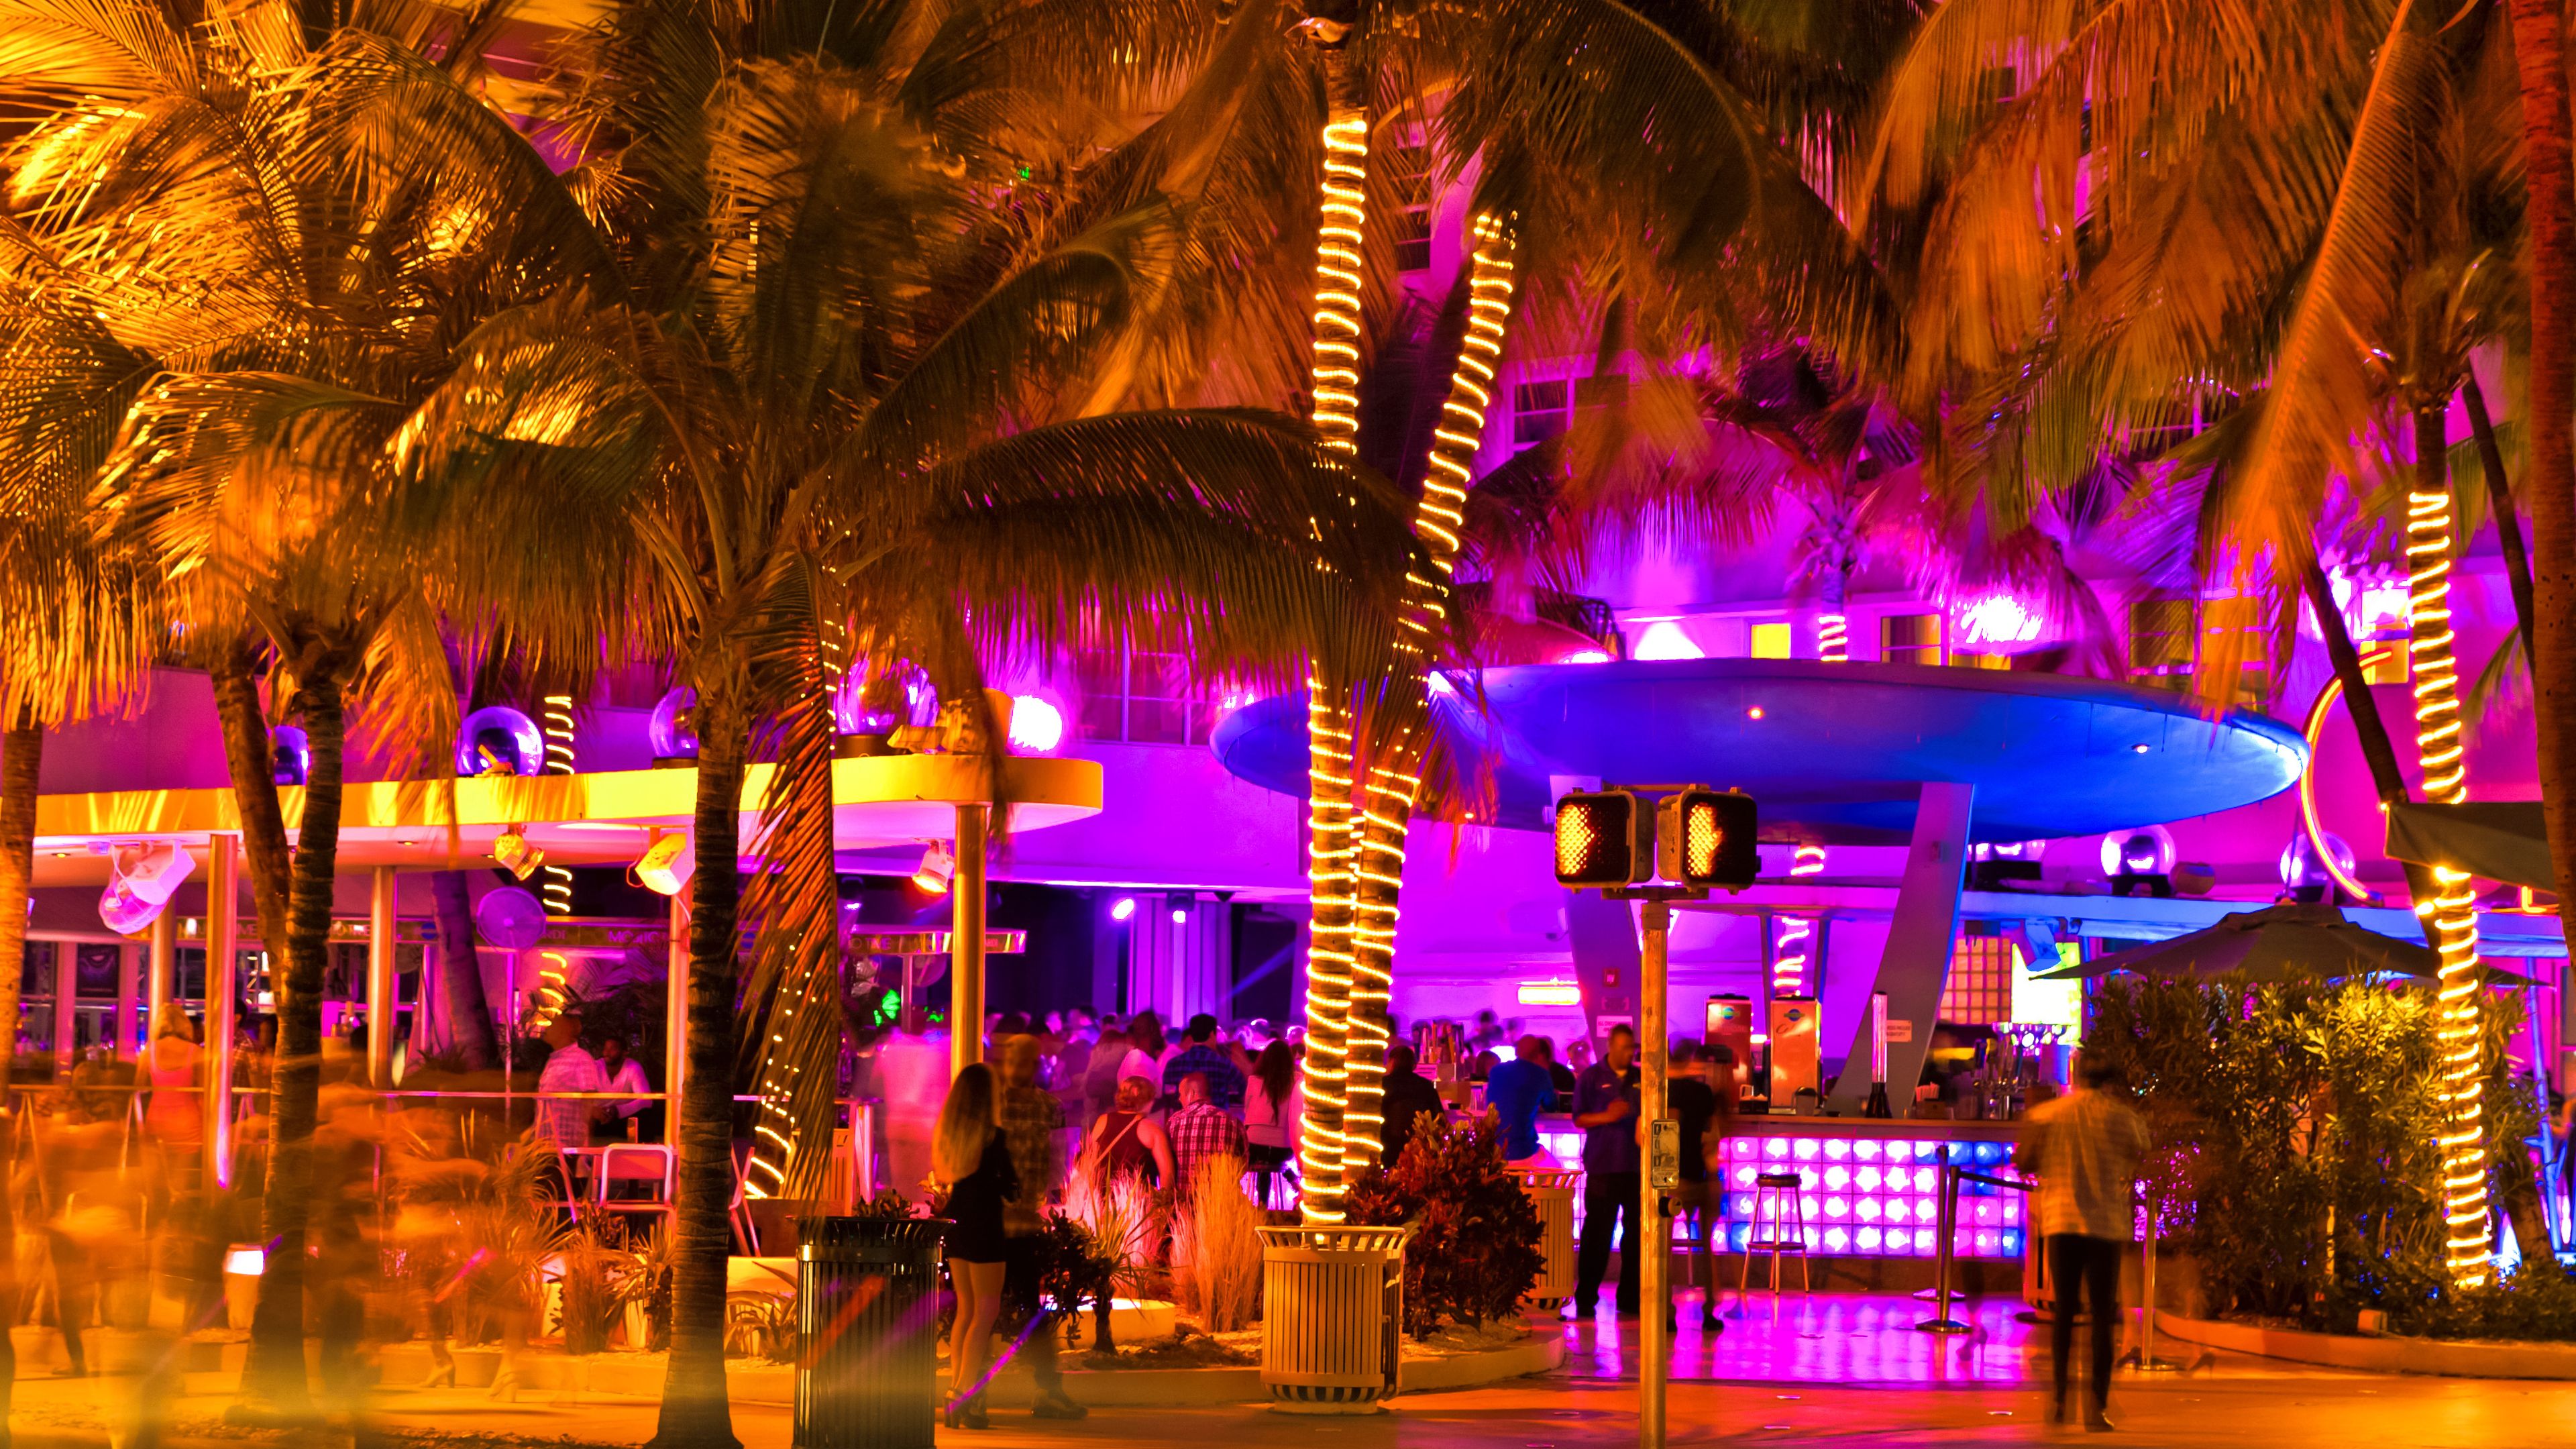 The Complete Guide to the Nightclubs of Las Vegas